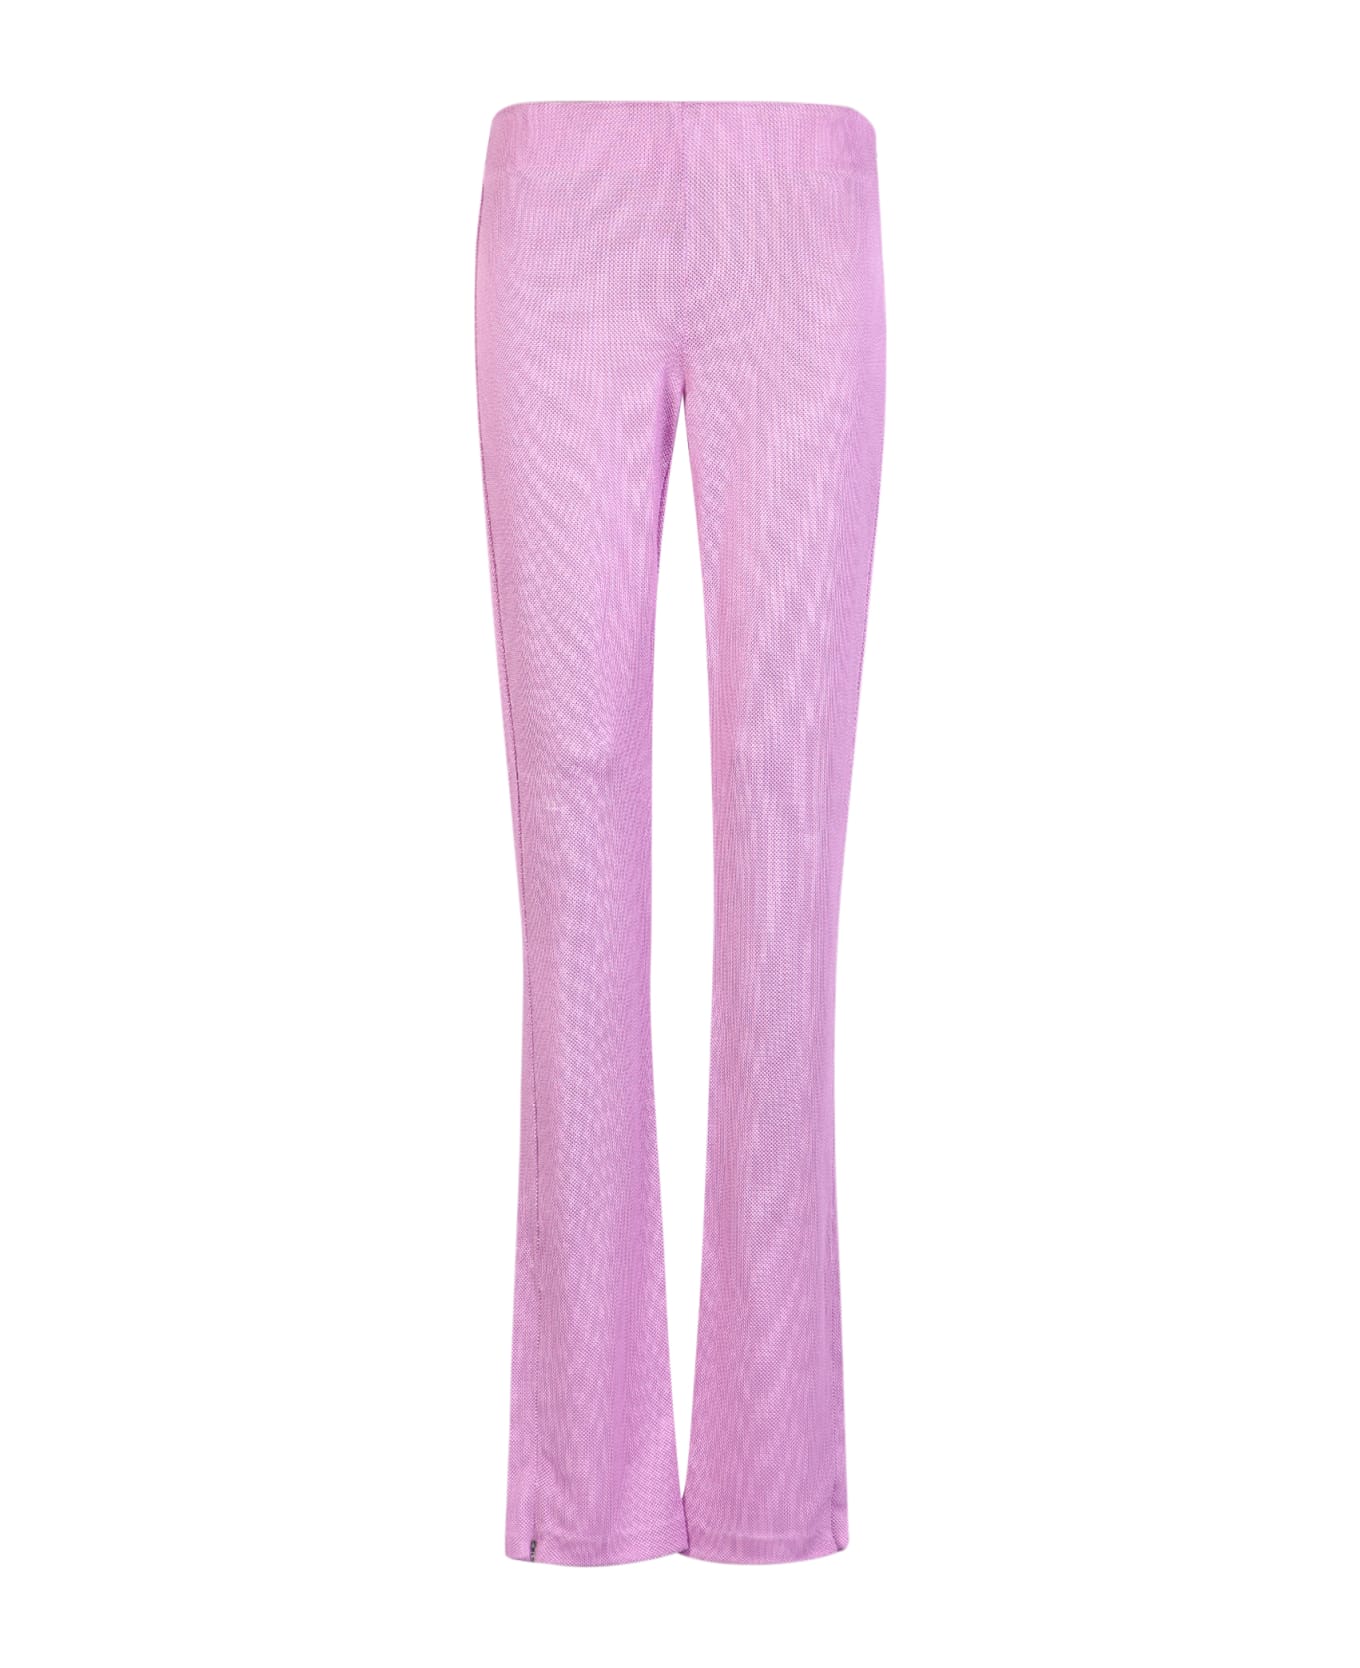 1017 ALYX 9SM Mauve Knitted Leggings - Pink ボトムス